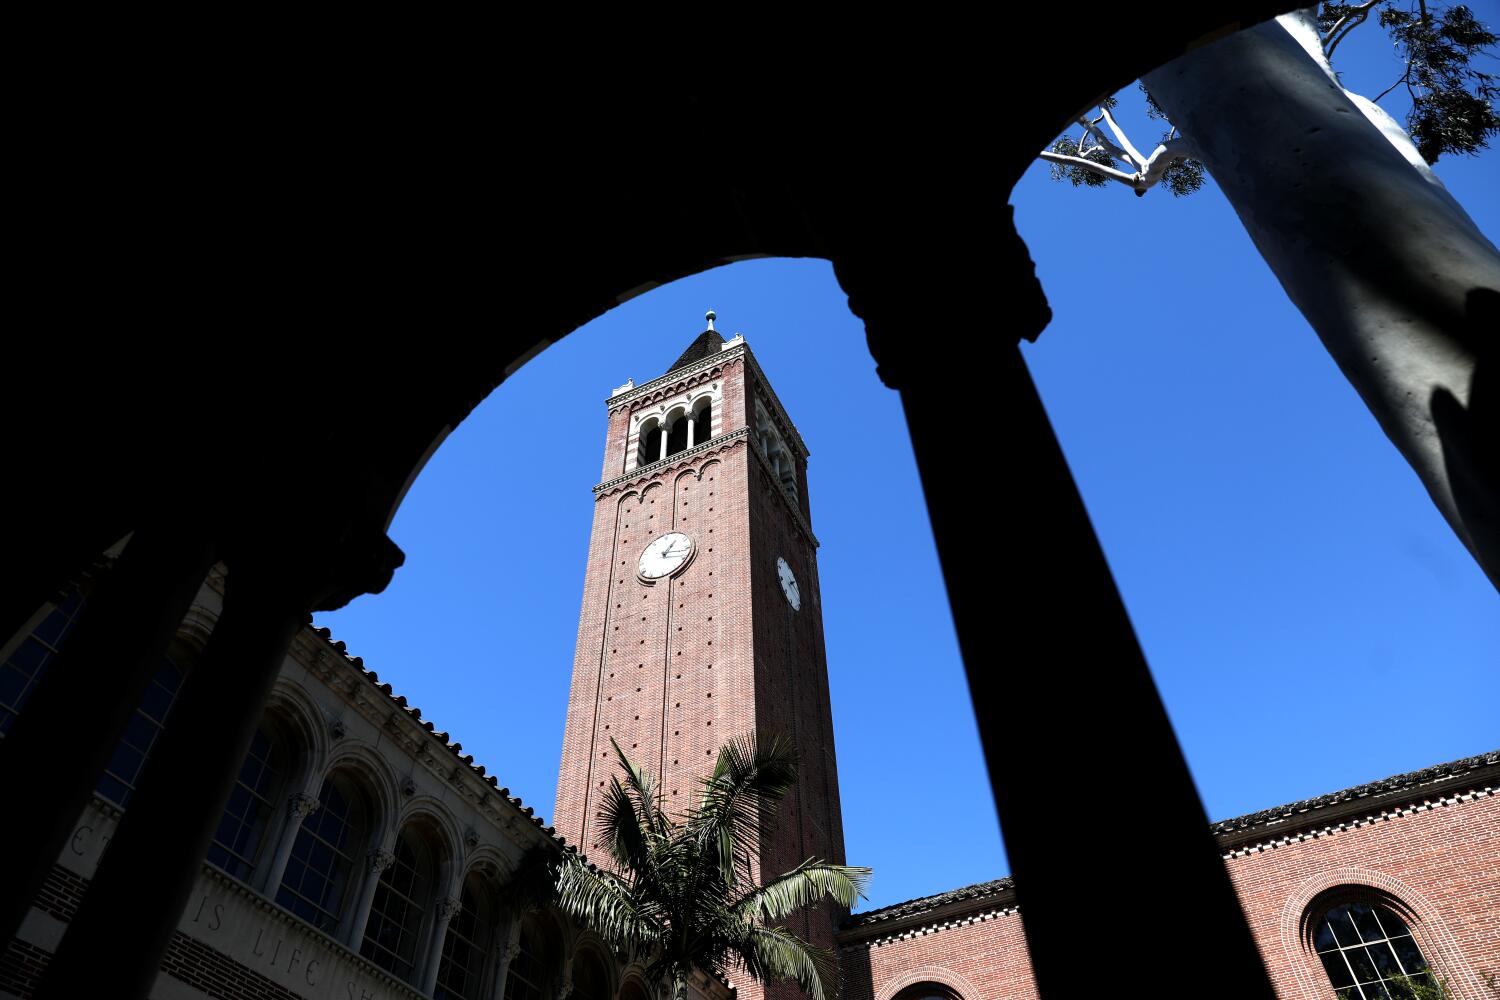 After canceling commencement, USC will host event at L.A. Coliseum, rolls out new campus security